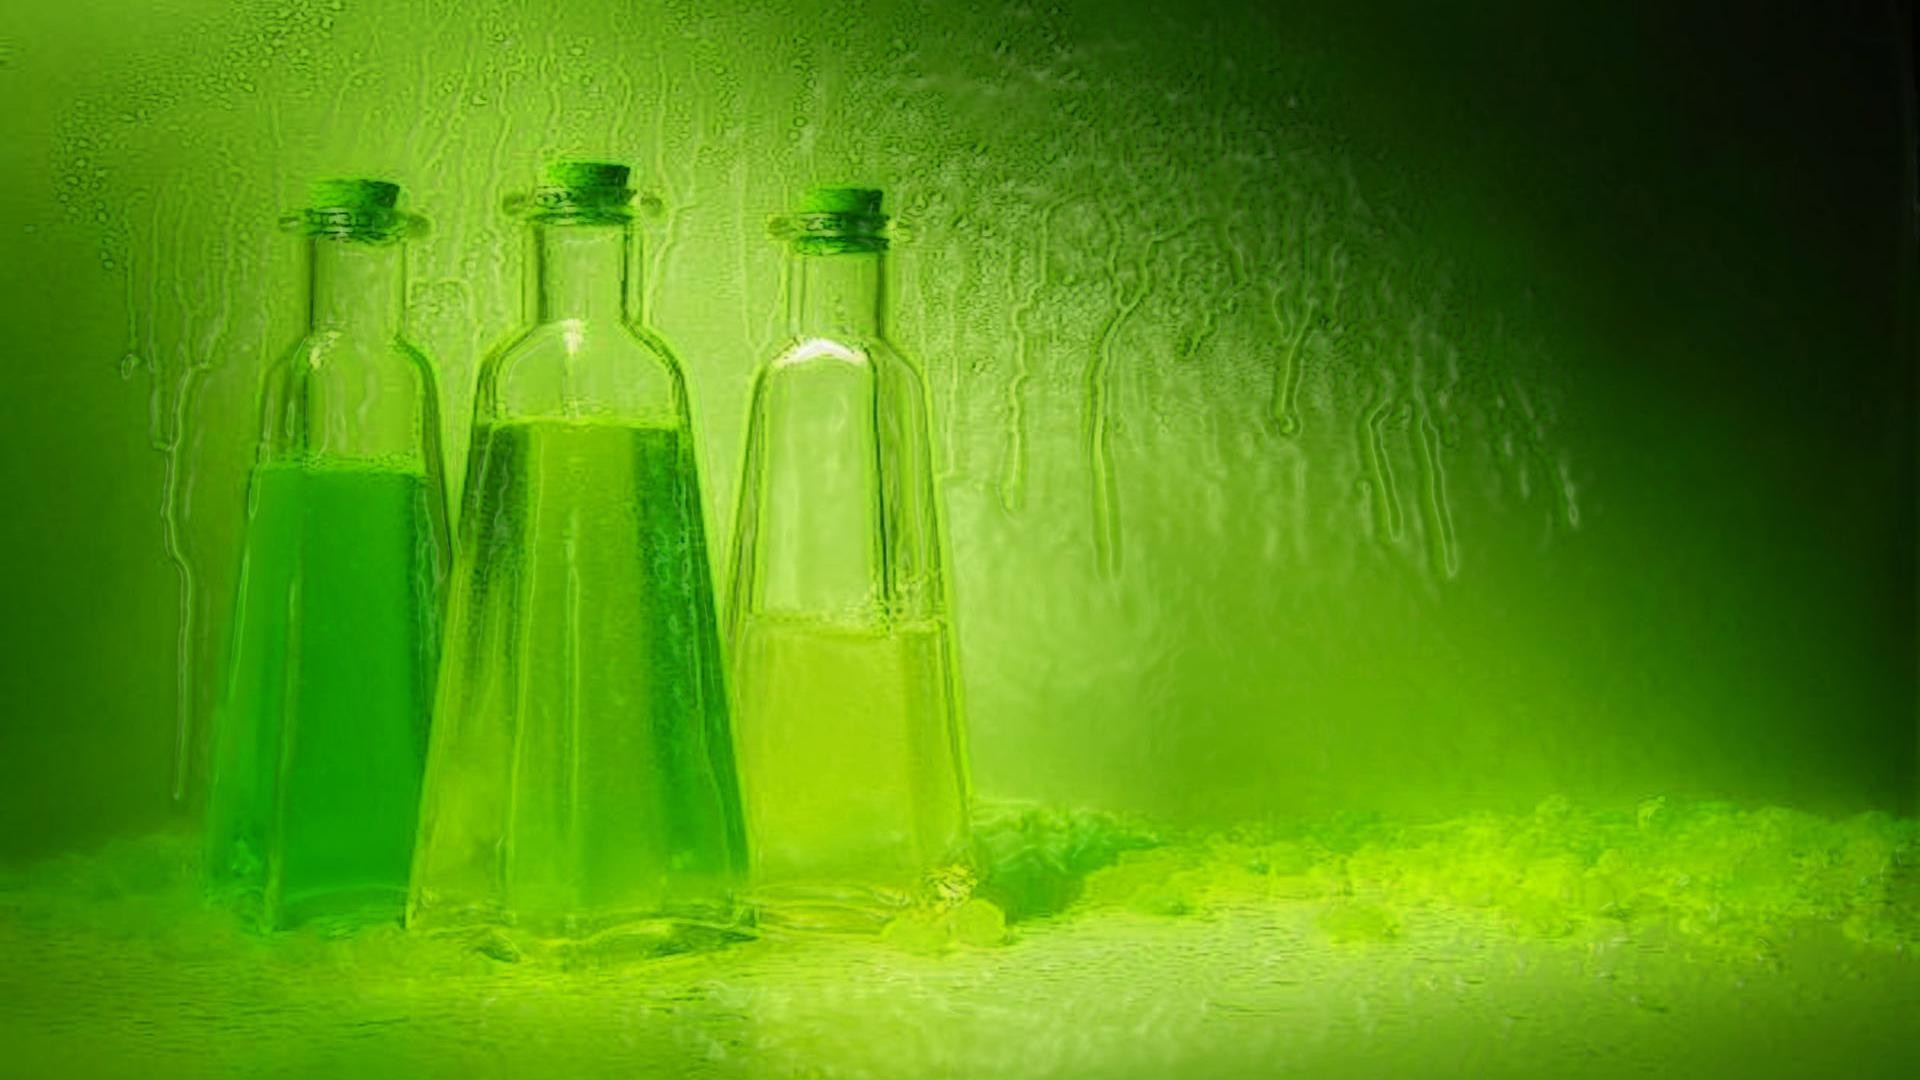 hd Green and relaxed bottle design desktop pictures wide  wallpapers:1280×800,1440×900,